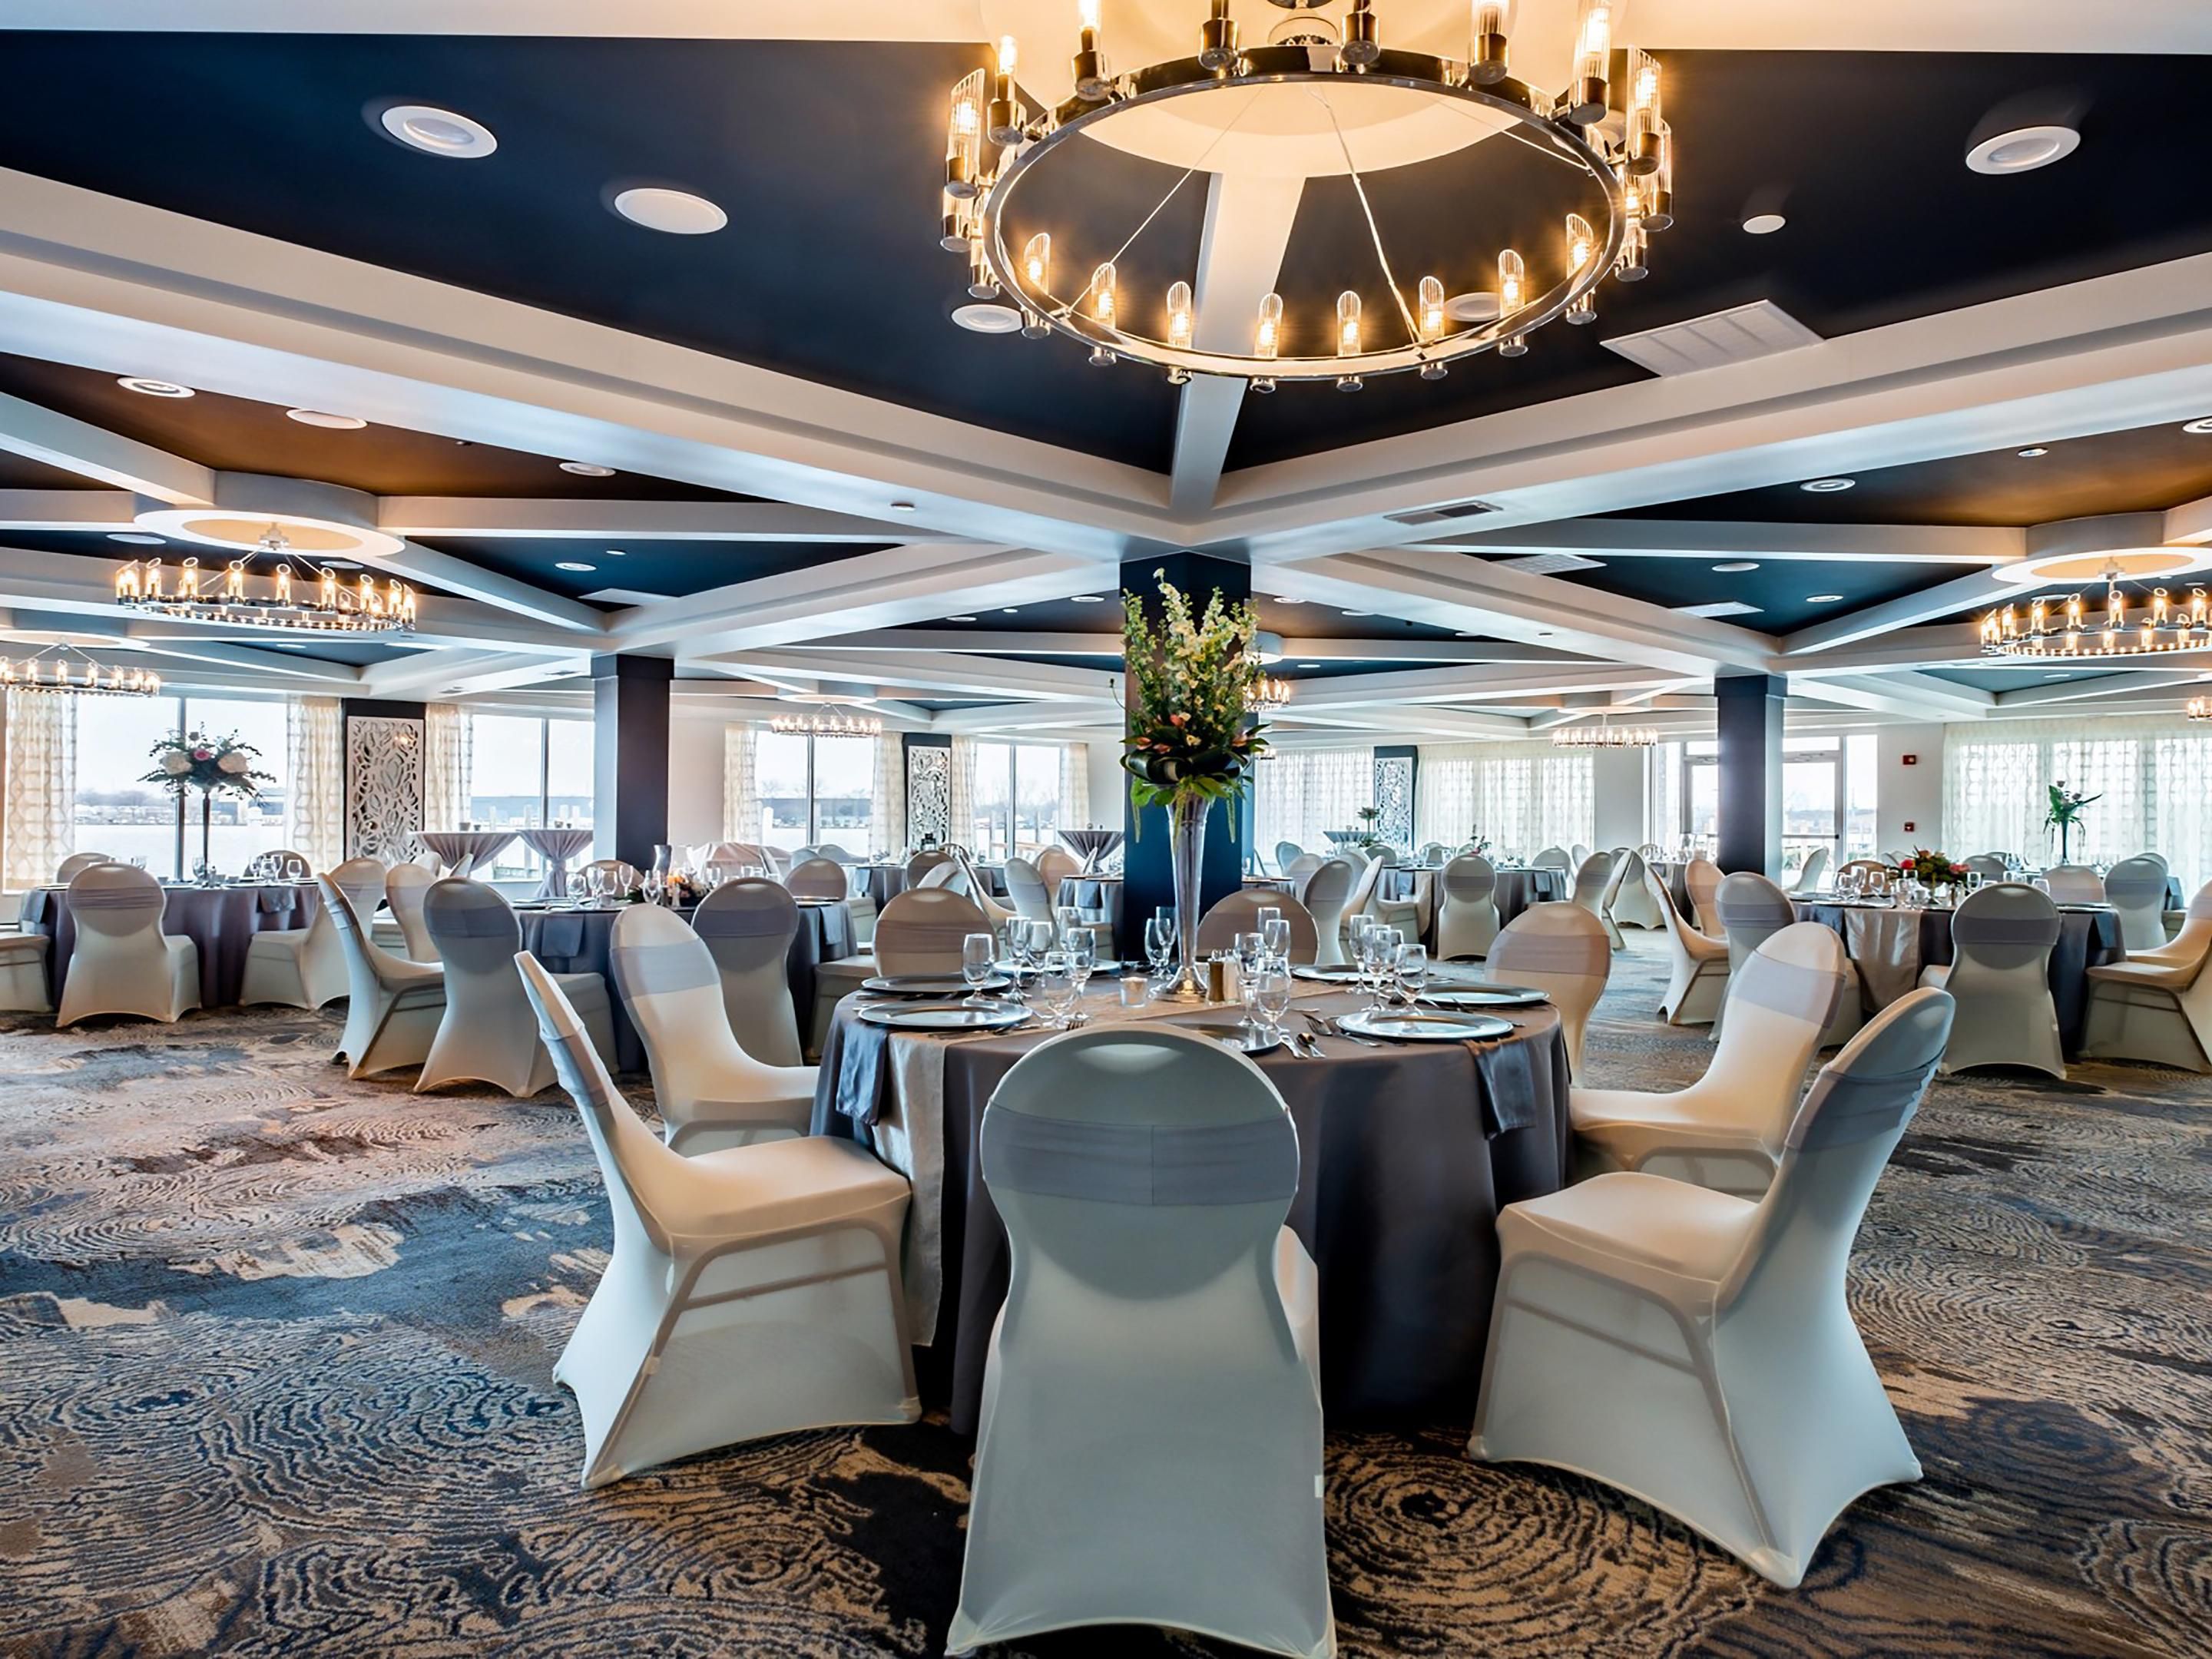 Our Waterfront Ballroom features 3,600 square feet of panoramic views of the Grand River with exclusive outdoor deck access and state of the art audio-visual equipment. This one-of-a-kind space was specifically designed to make dream weddings a reality and surpass the needs of our corporate groups.